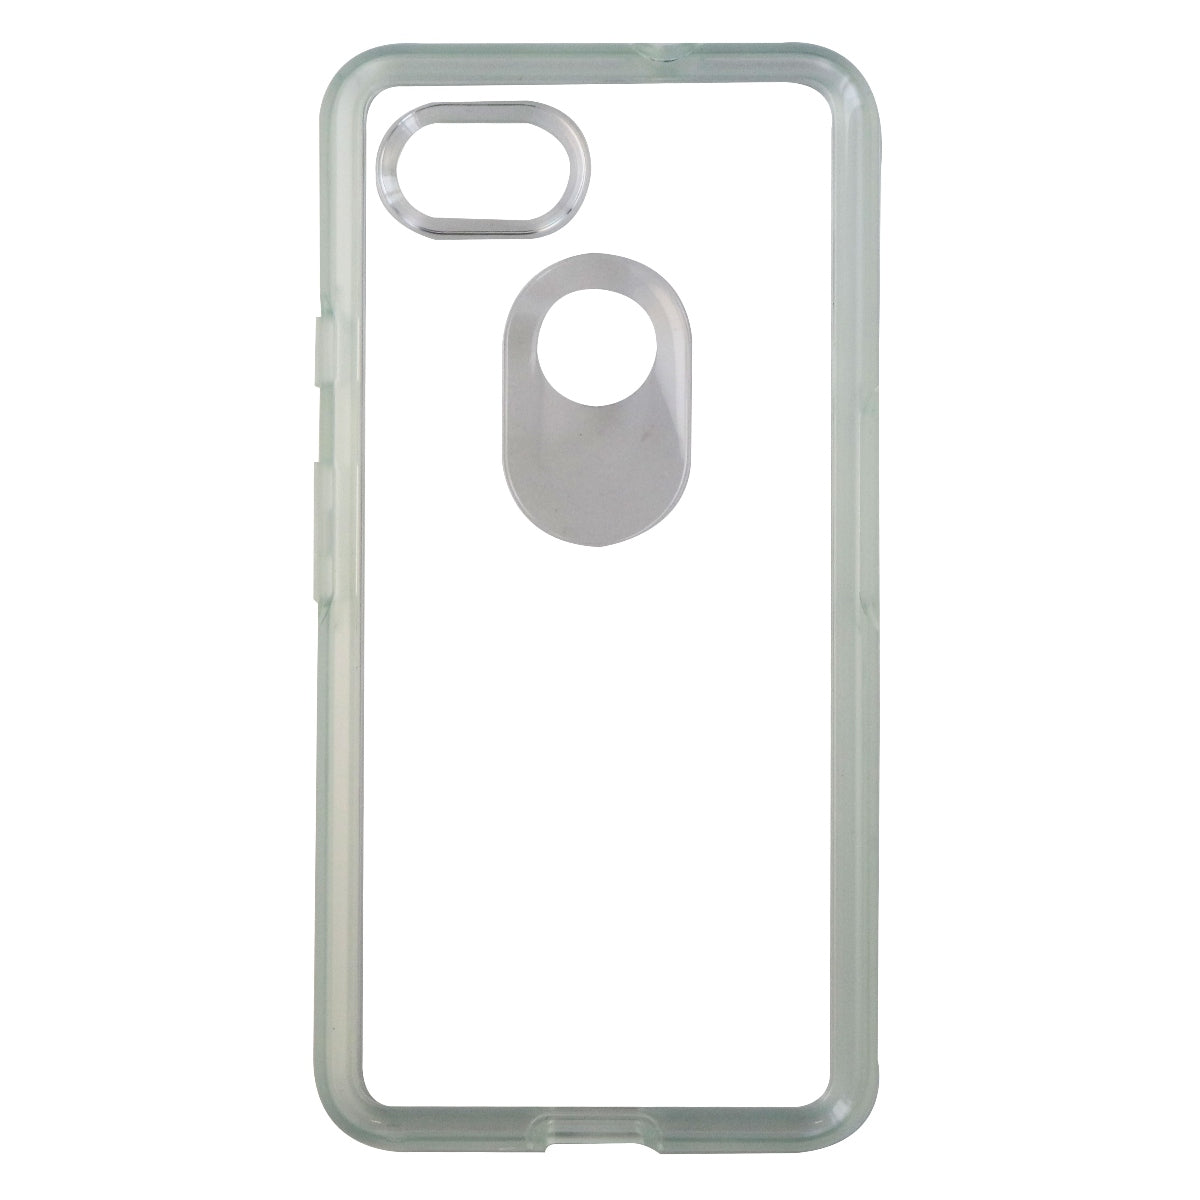 OtterBox Symmetry Series Hard Case for Google Pixel 2 XL Smartphone - Clear